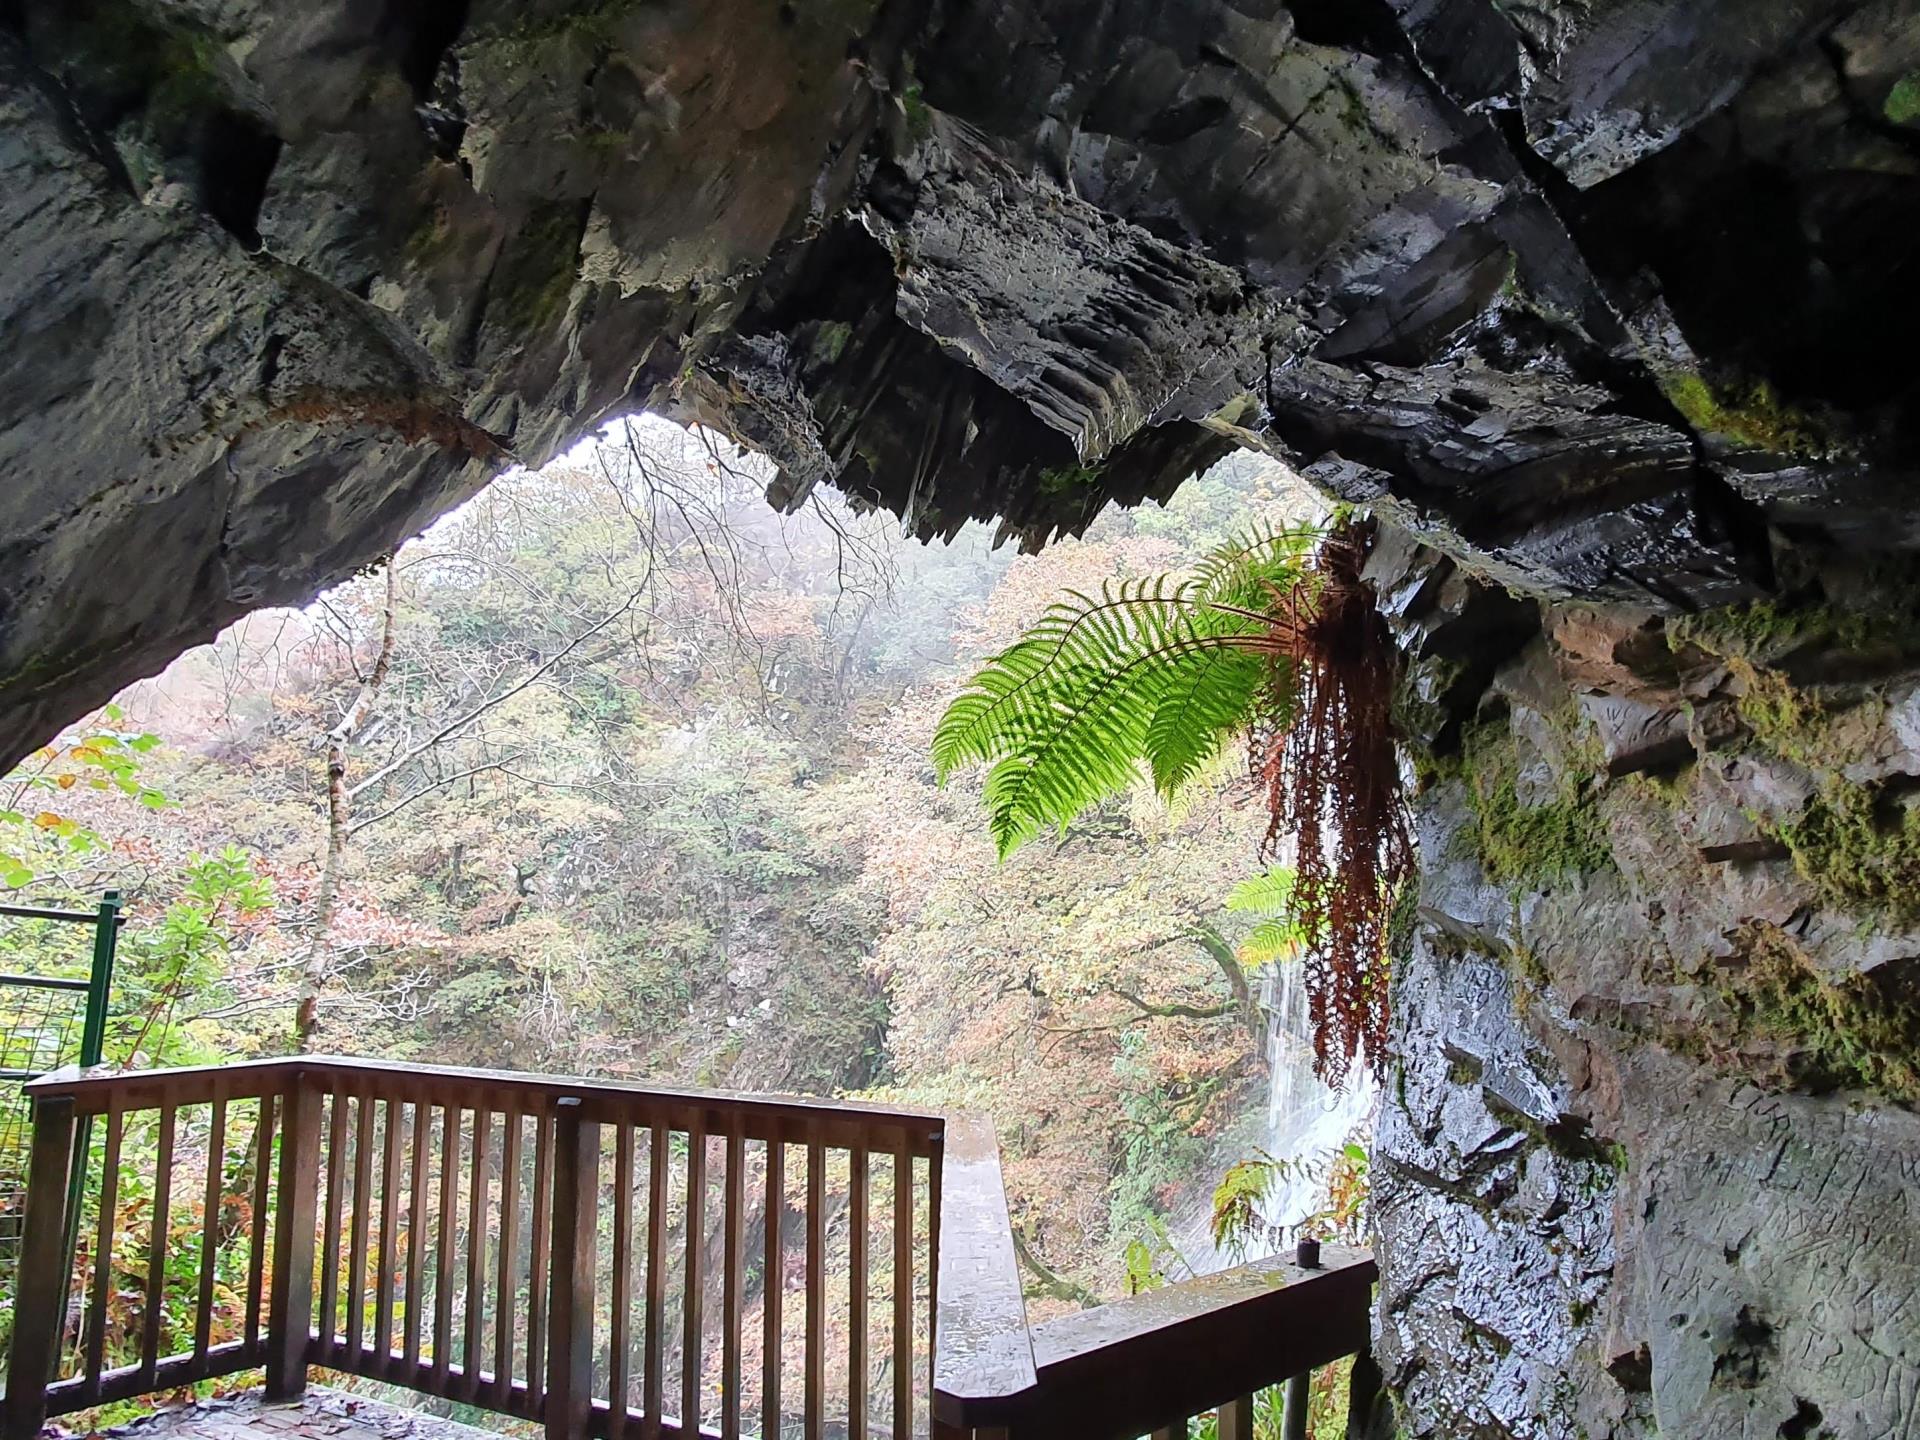 Inside Robbers Cave